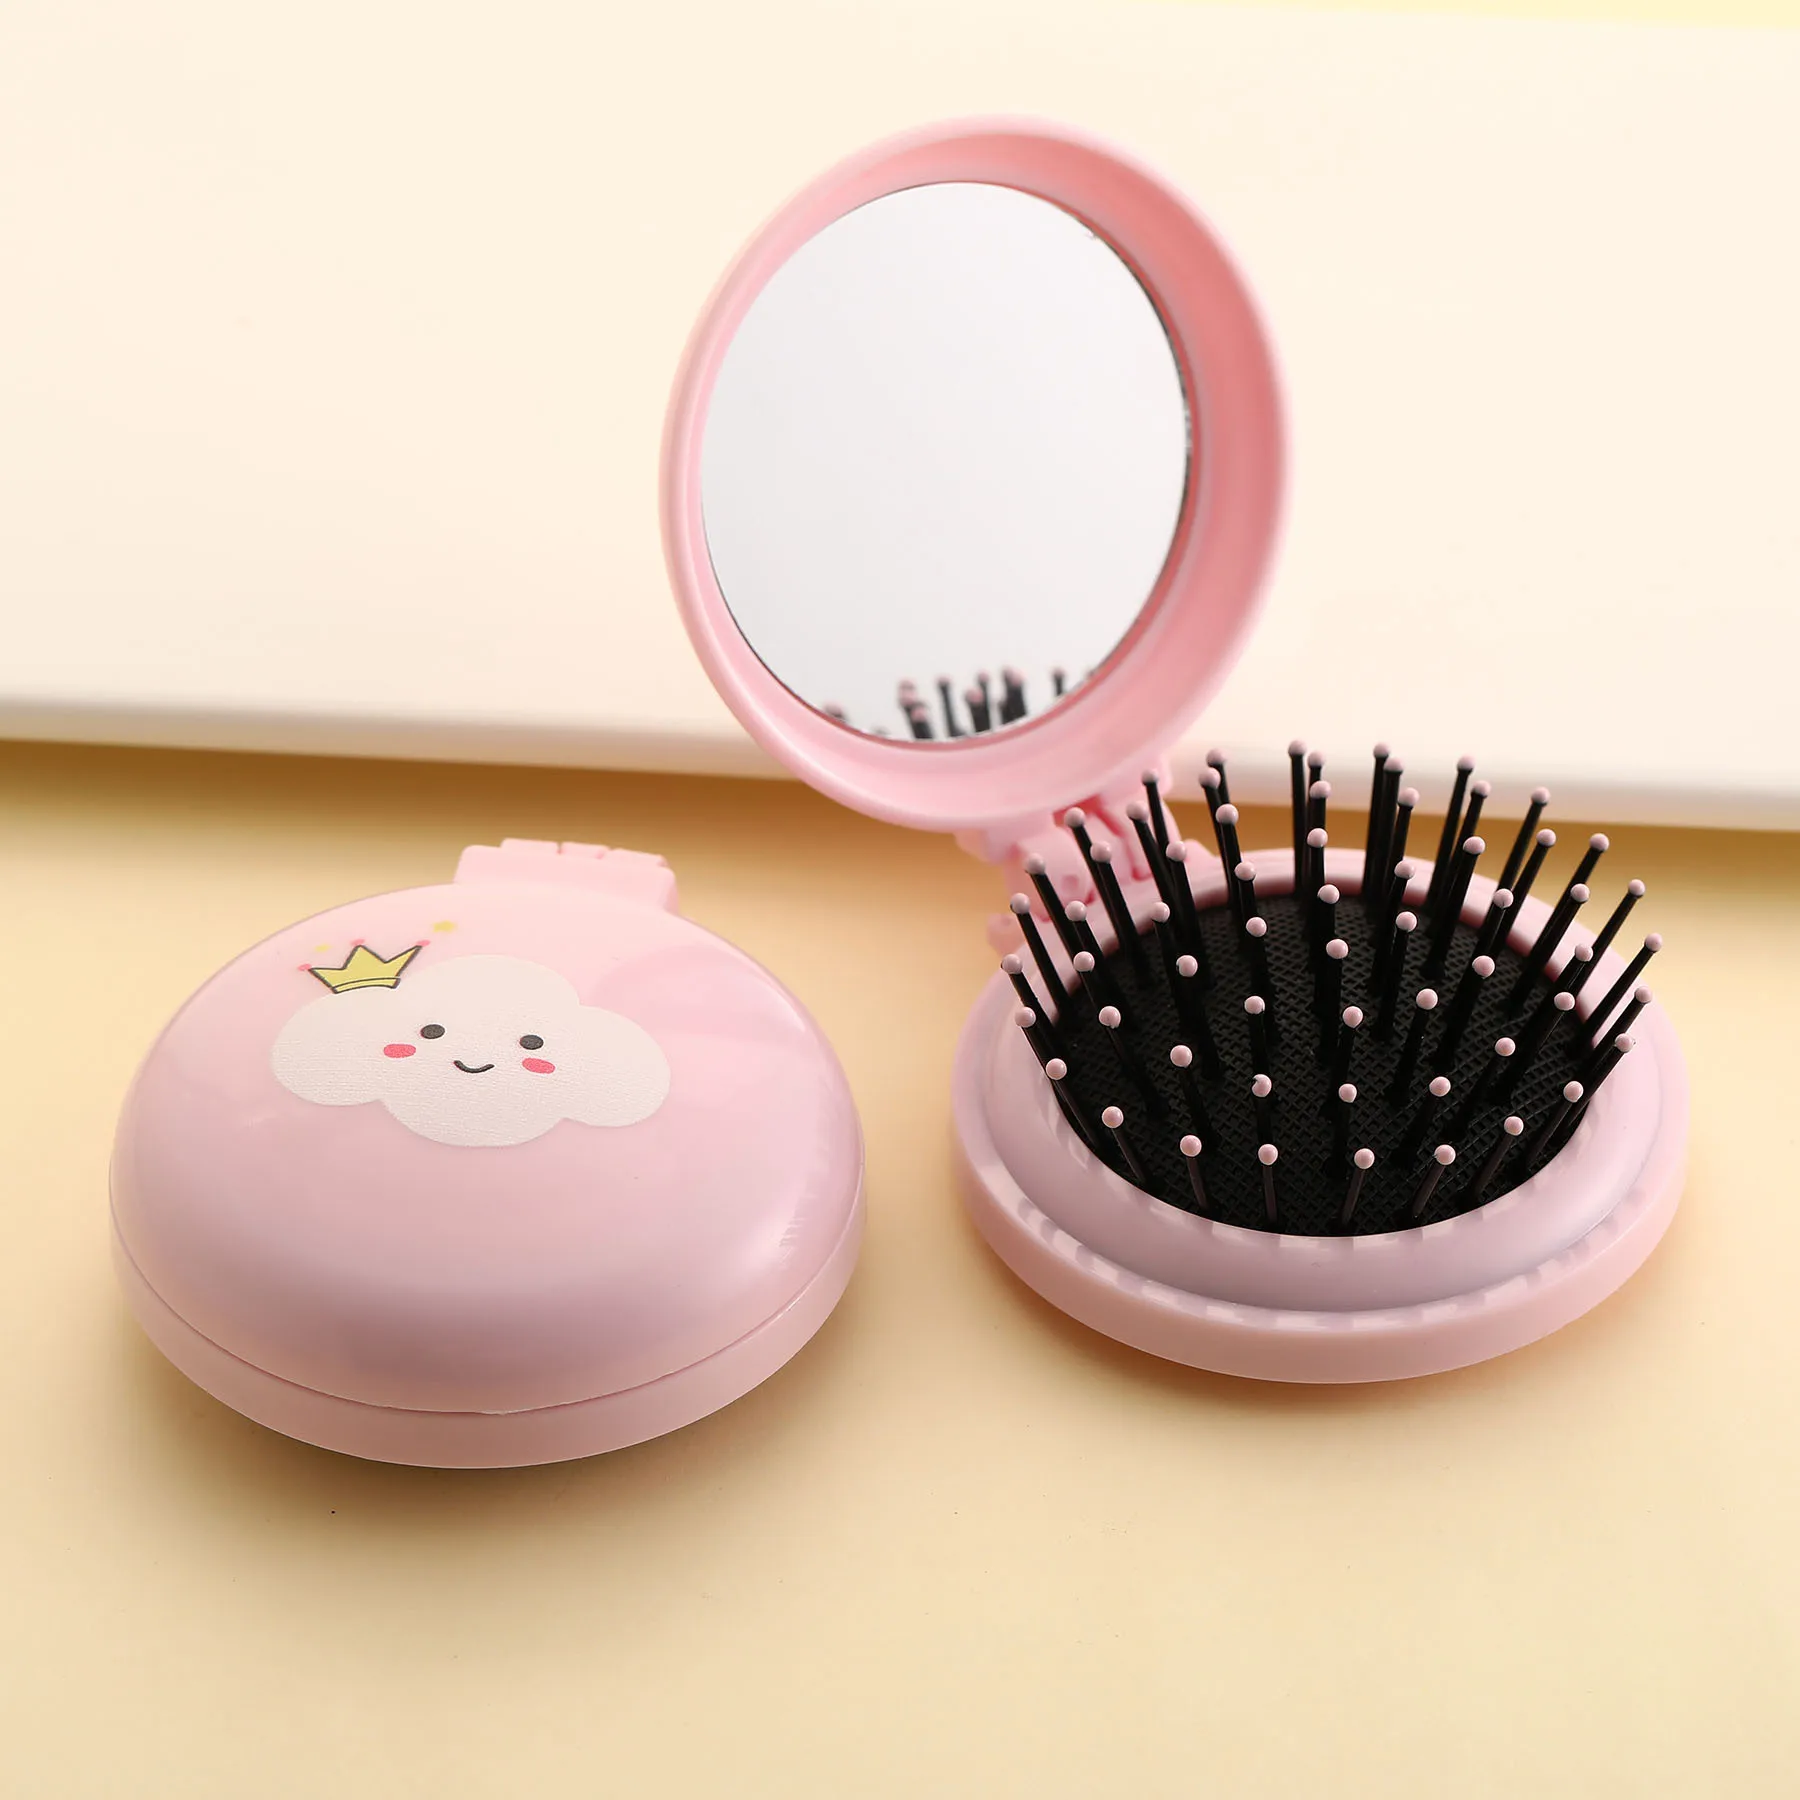 H4b45051103854ec6b333f11d71c3b2b5w Mini Pocket Mirror Cute Massage Folding Mirror with Comb Portable Pocket Small Travel Girl Hair Brush with Mirror Styling Tools